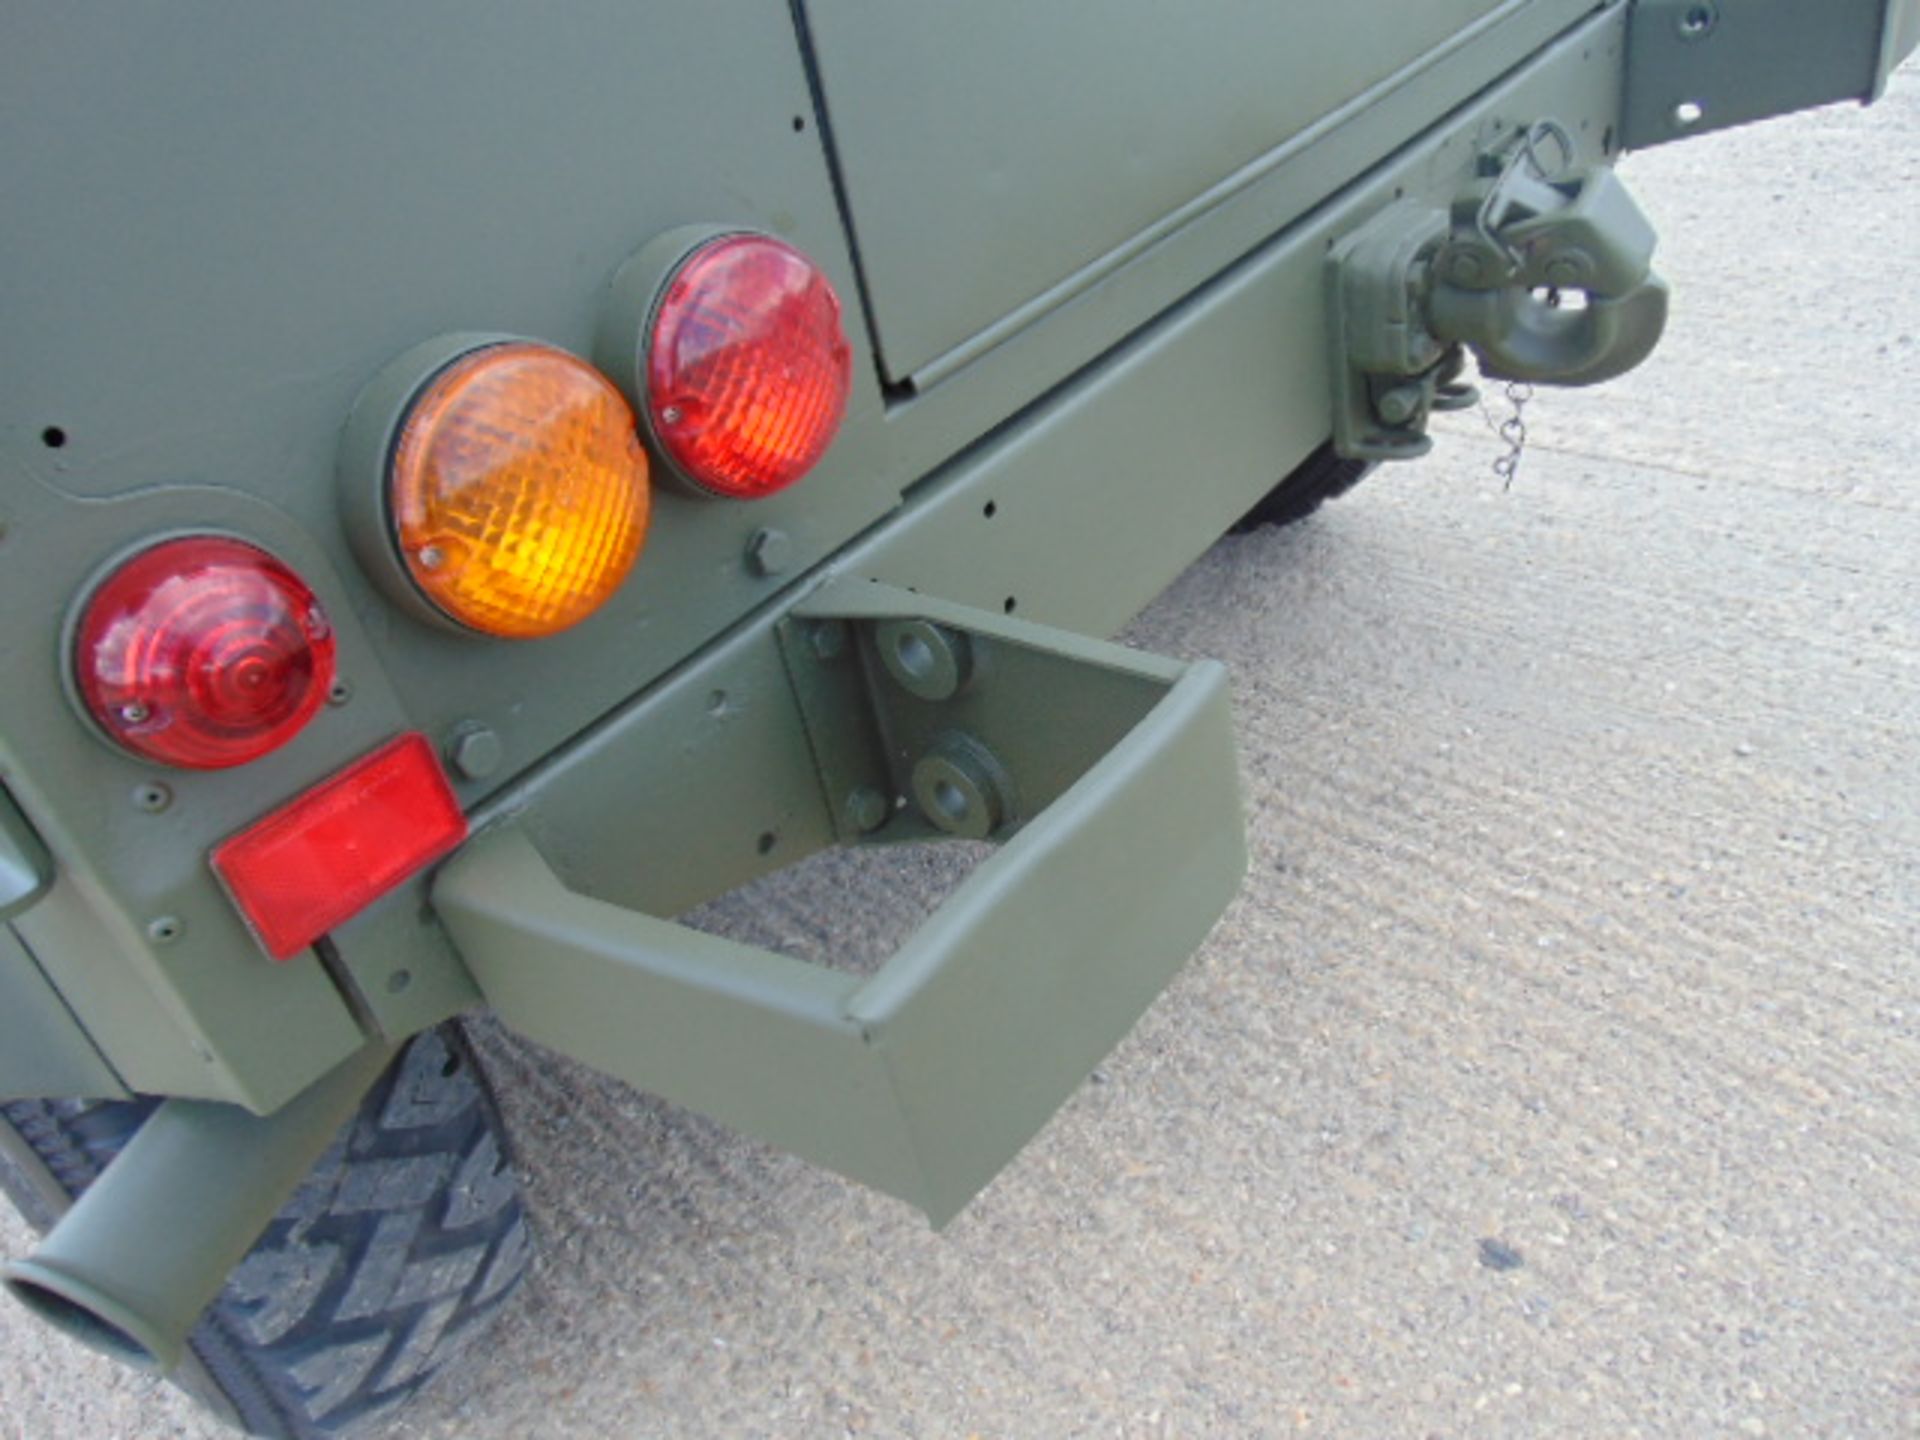 Military Specification Land Rover Wolf 90 Hard Top - Image 20 of 24